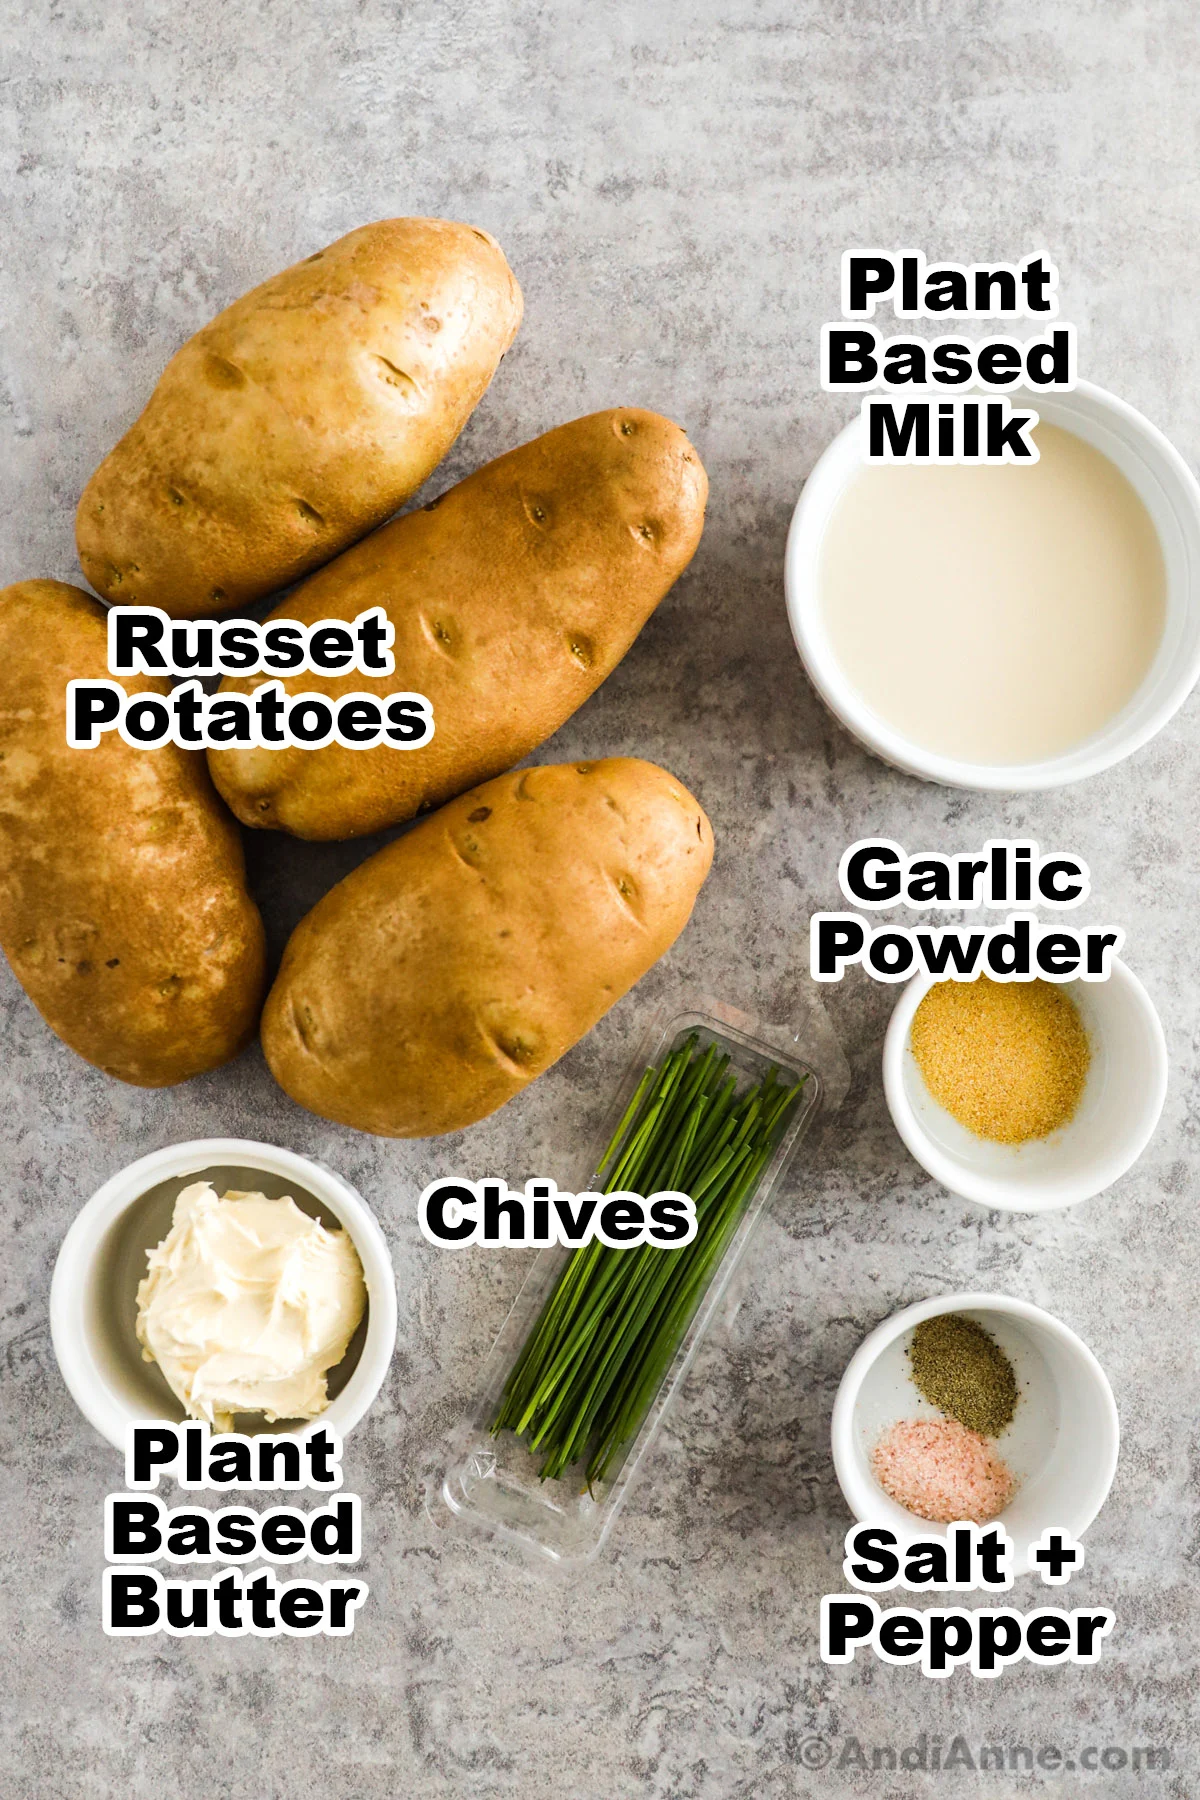 Recipe ingredients on the counter including russet potatoes, and bowls of plant based milk, garlic powder, plant based butter, salt and pepper.